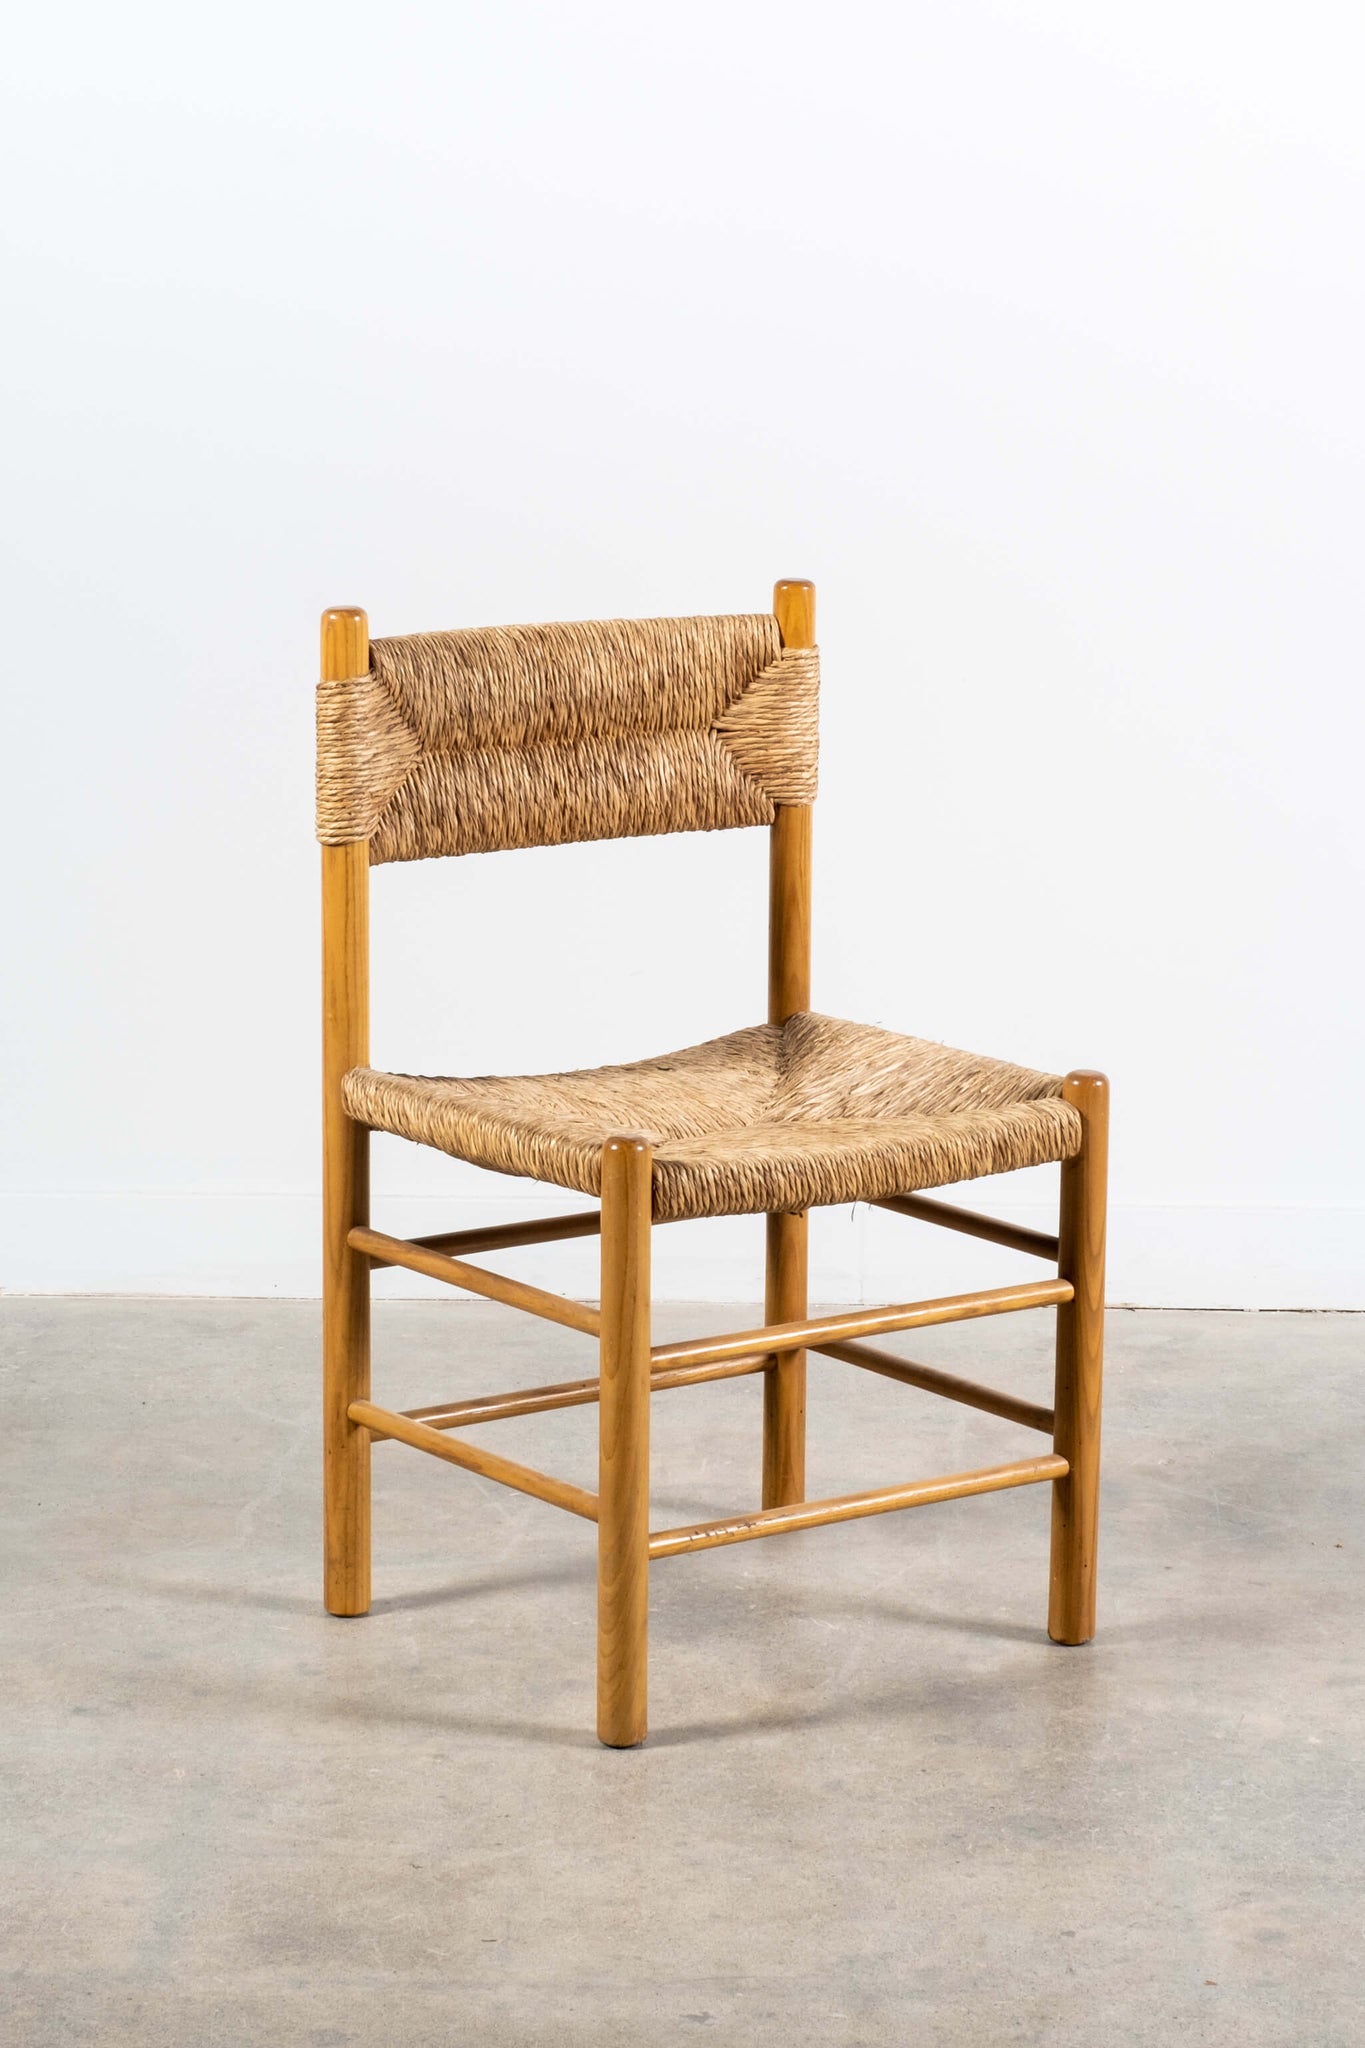 Rare Vintage Dordogne French Dining Chairs with Wood Frame & Woven Jute Seat, front angled view